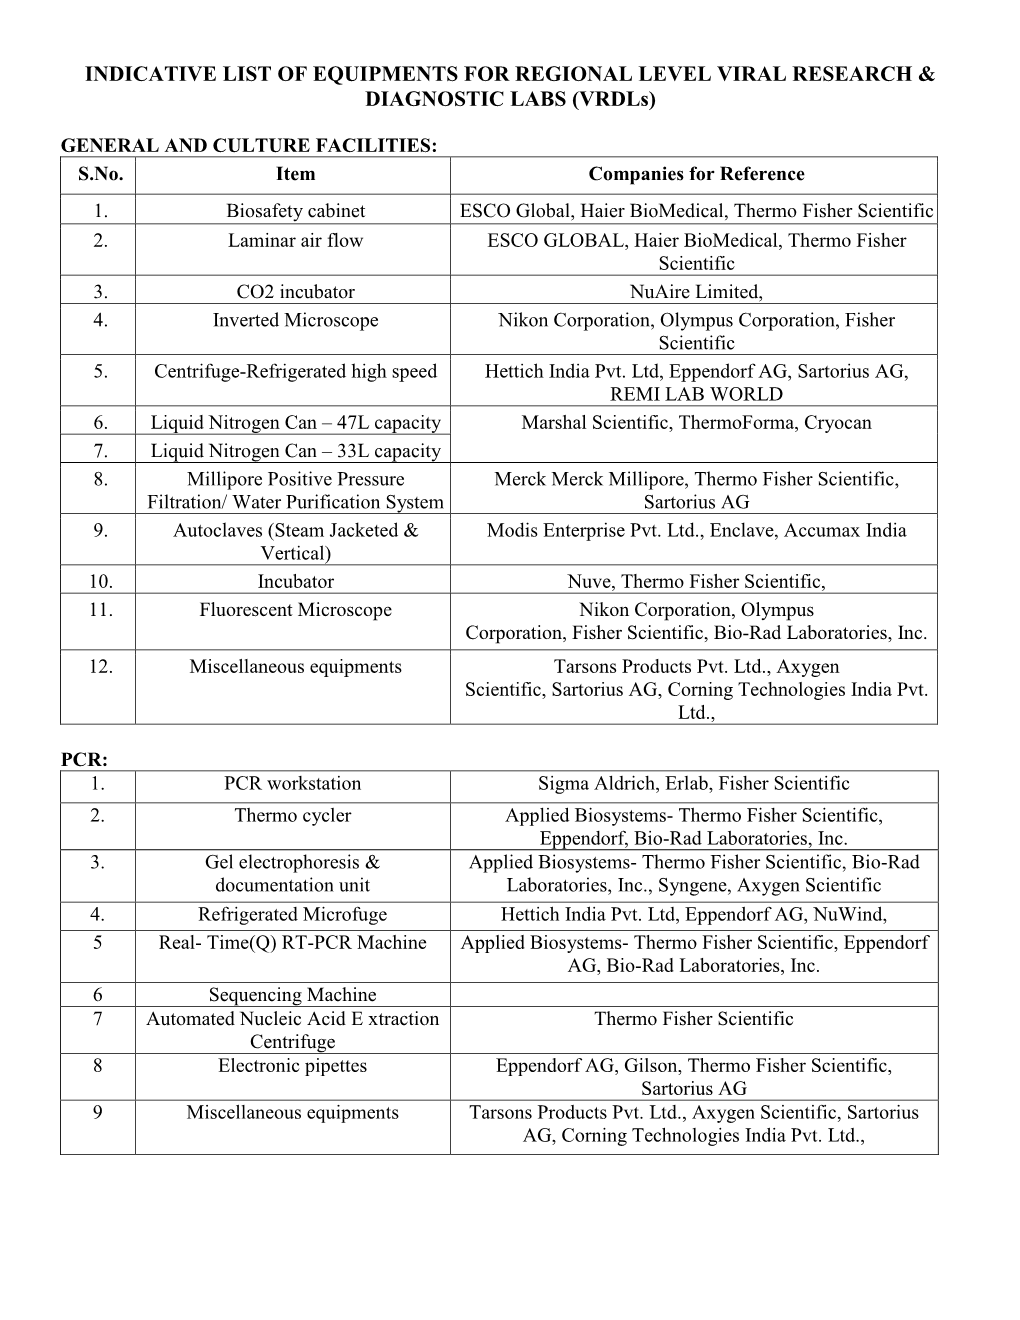 INDICATIVE LIST of EQUIPMENTS for REGIONAL LEVEL VIRAL RESEARCH & DIAGNOSTIC LABS (Vrdls)